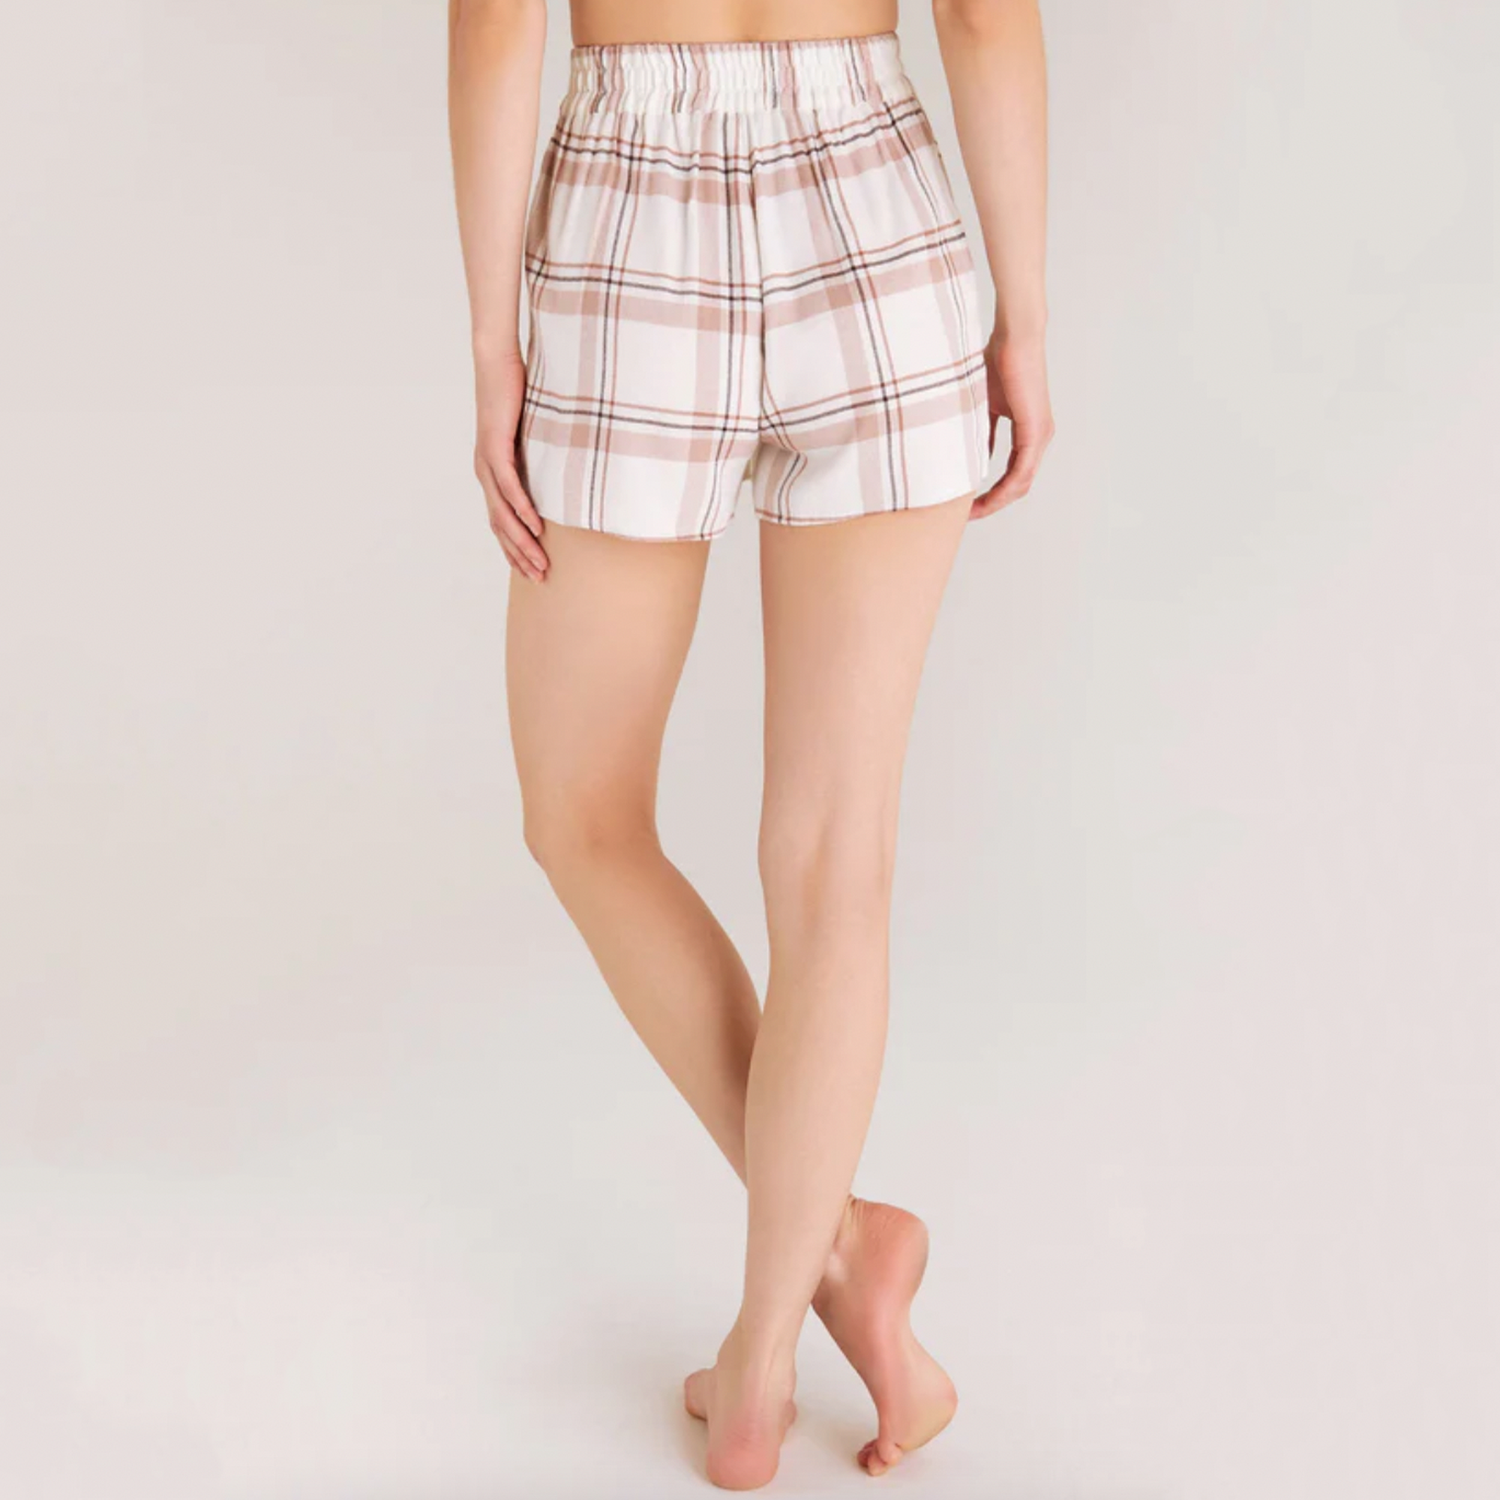 Z Supply Co Ed Plaid Boxer. The pull-on Co-ed Plaid Boxer is relaxed and oh-so-comfy!